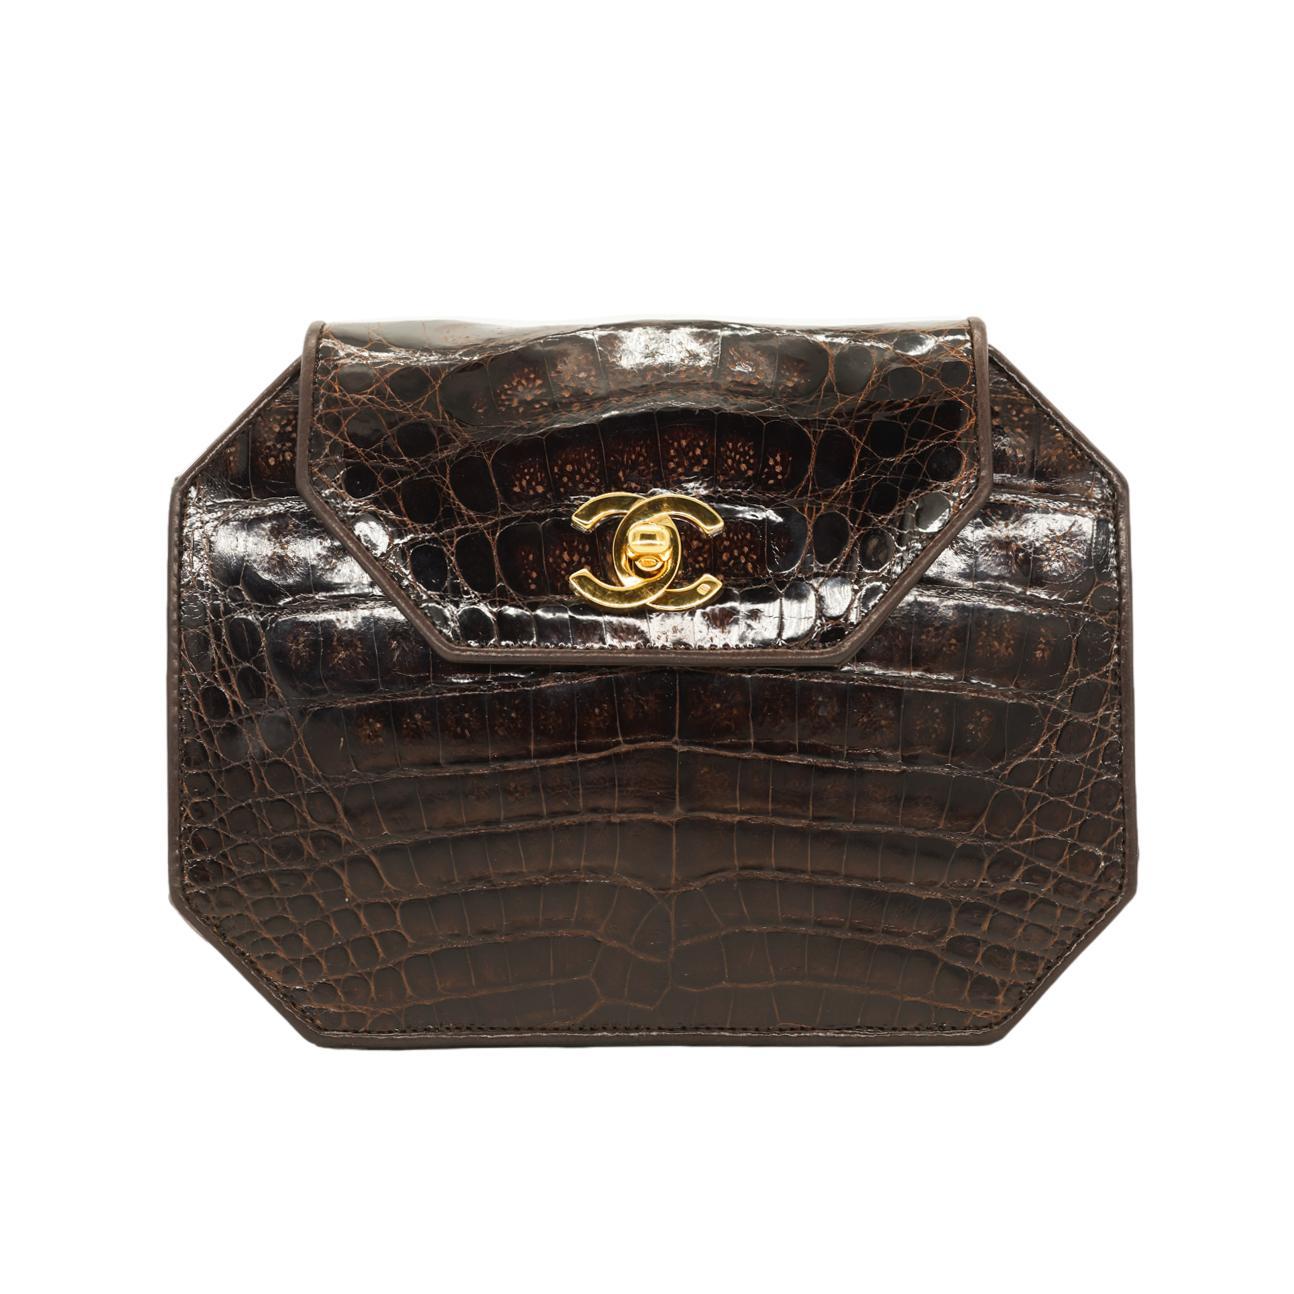 Chanel Brown Alligator Octagon Cross Body Flap Bag with Gold Hardware, 1989. Exceptional and rare, this highly sought after piece of Chanel history was produced between 1989 - 1990 baring a serial code of 